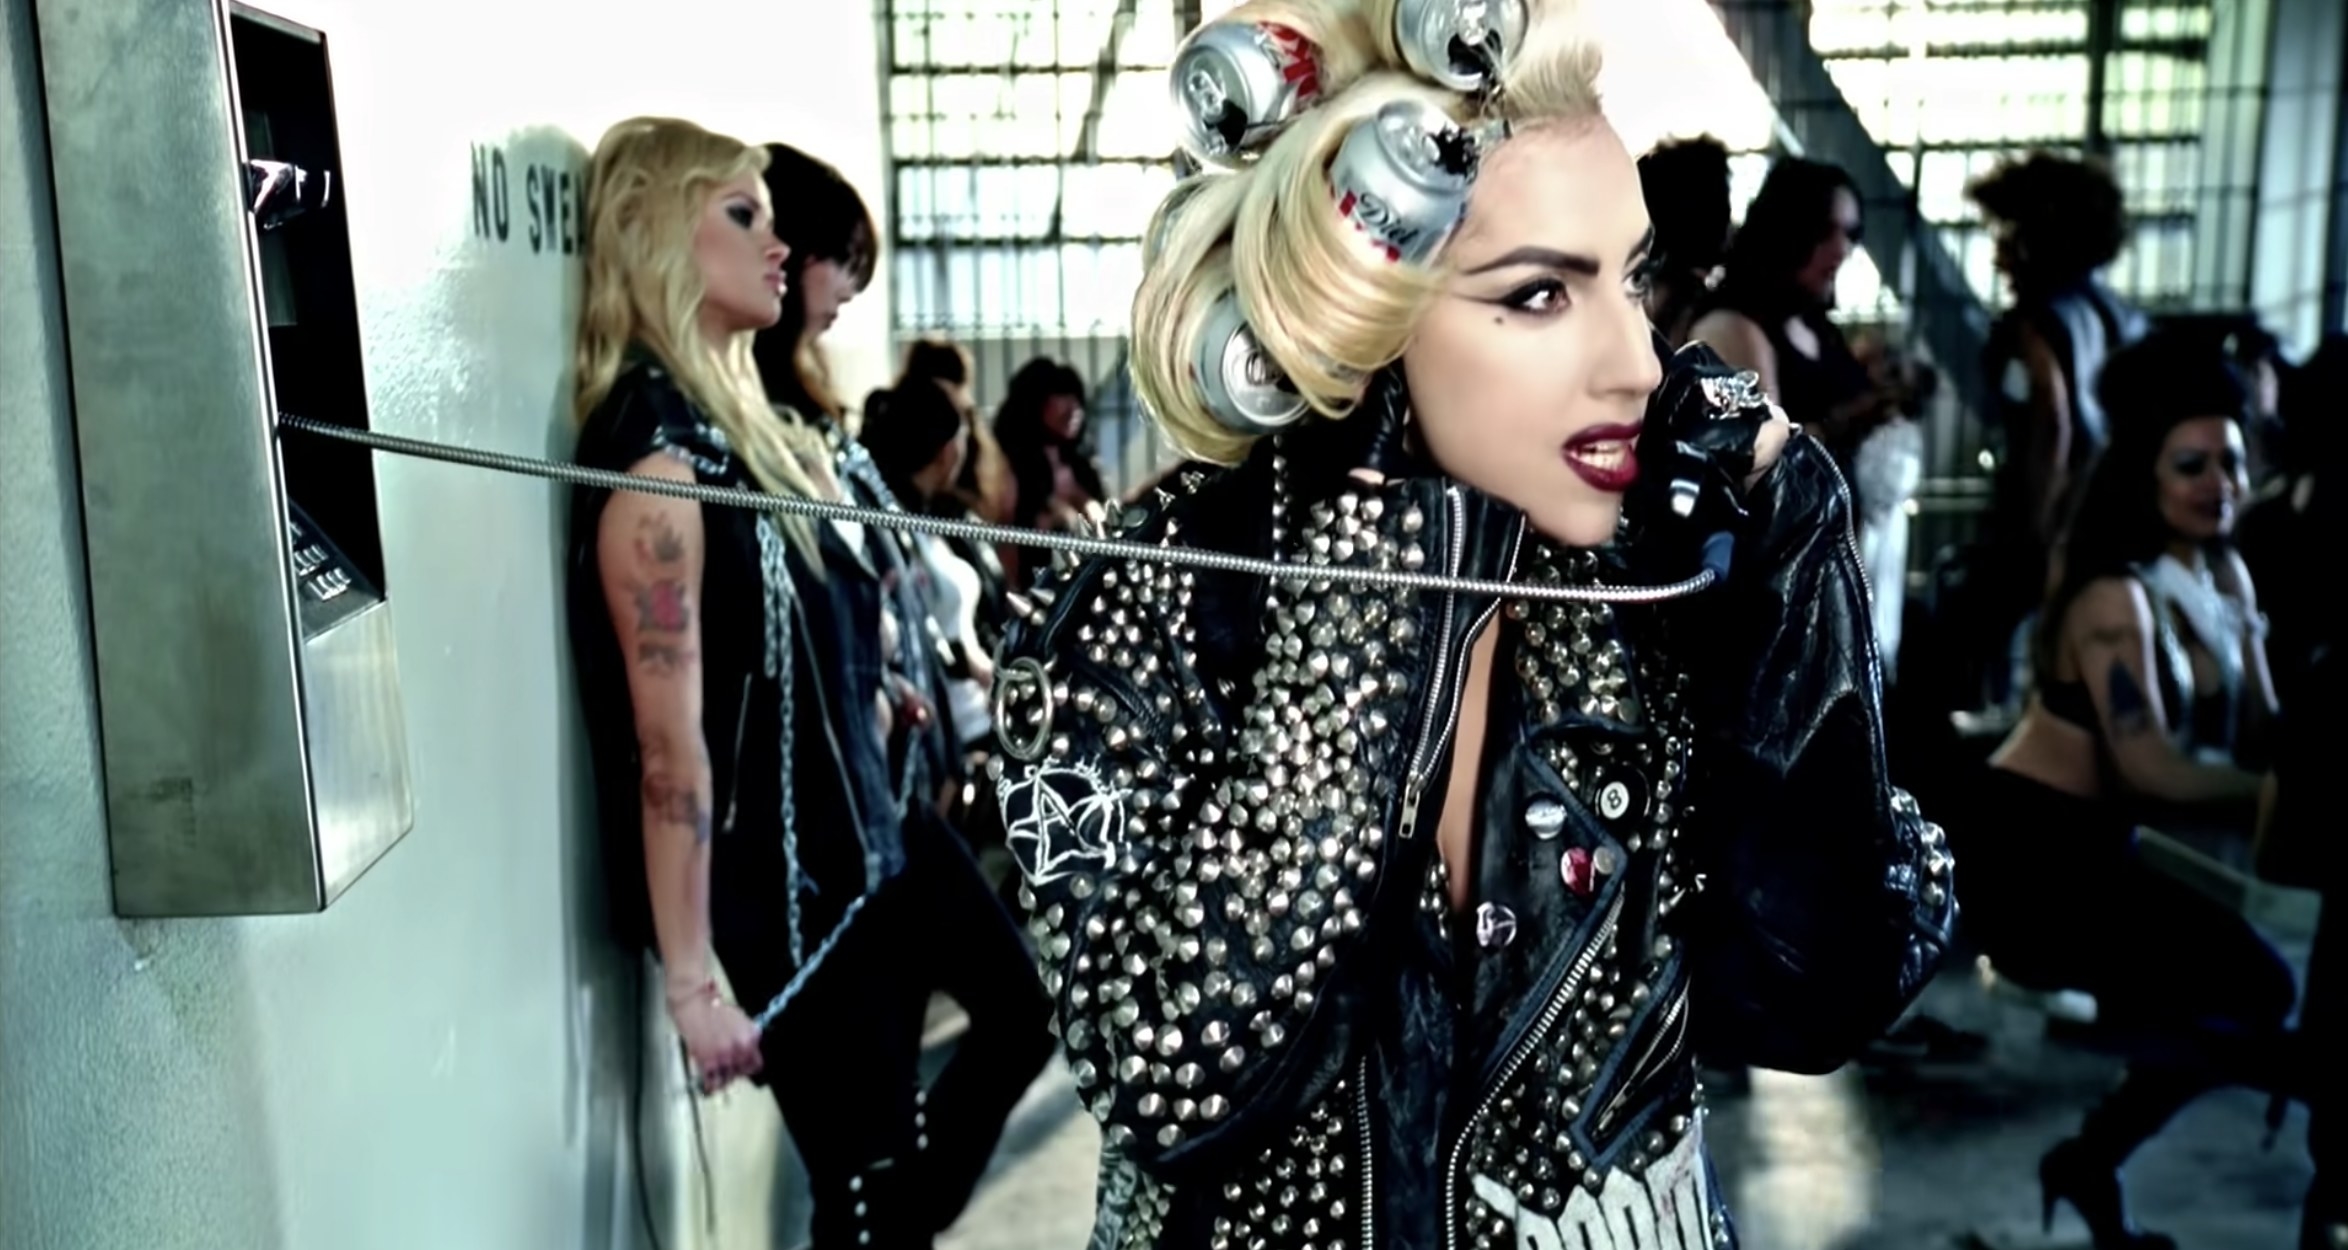 Lady Gaga in the &quot;Telephone&quot; music video